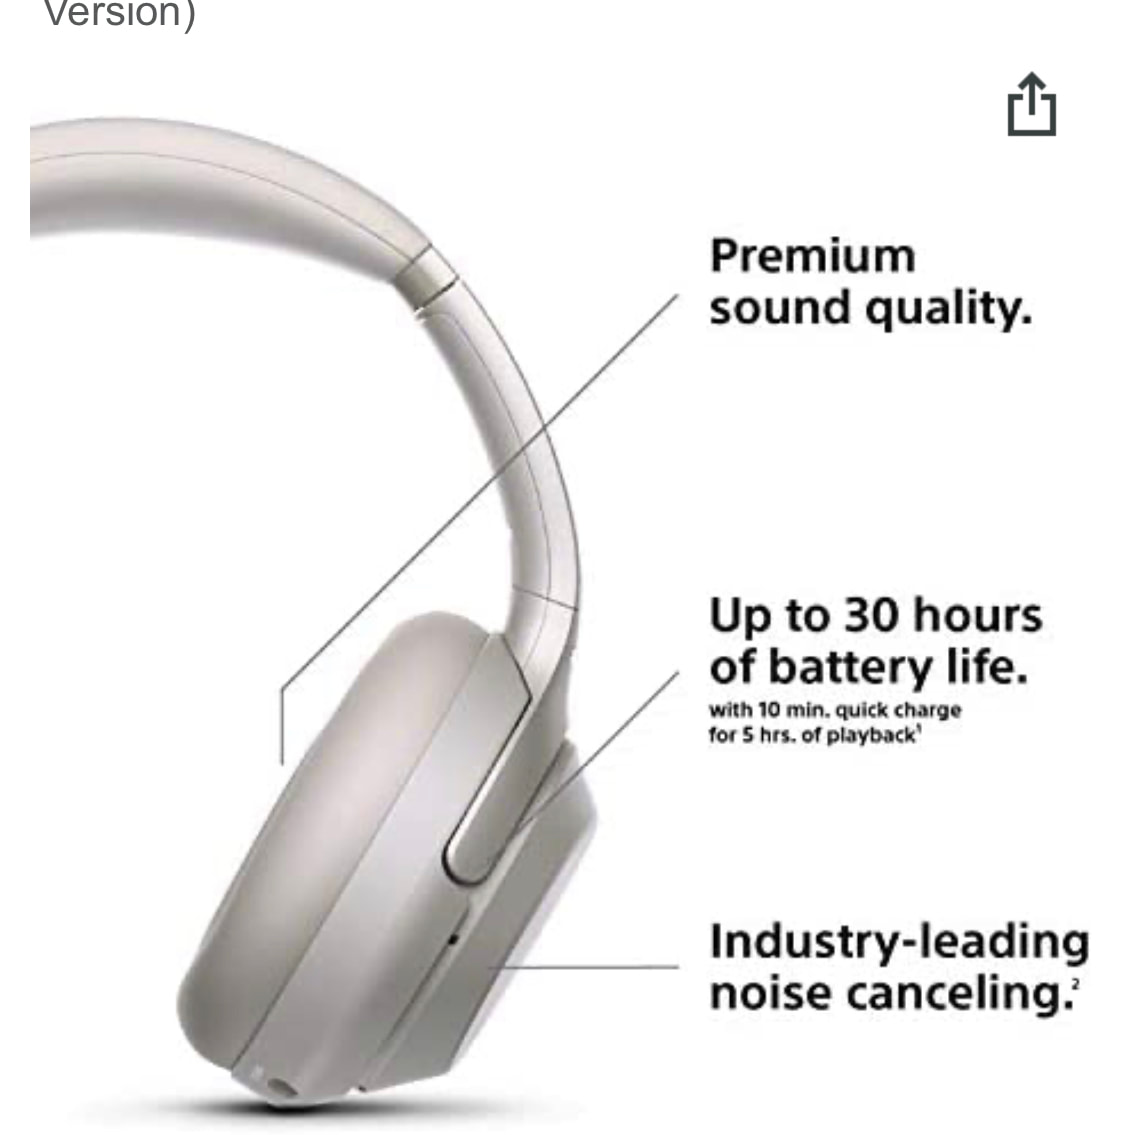 Sony WH1000XM3 Noise Cancelling Headphones : Wireless